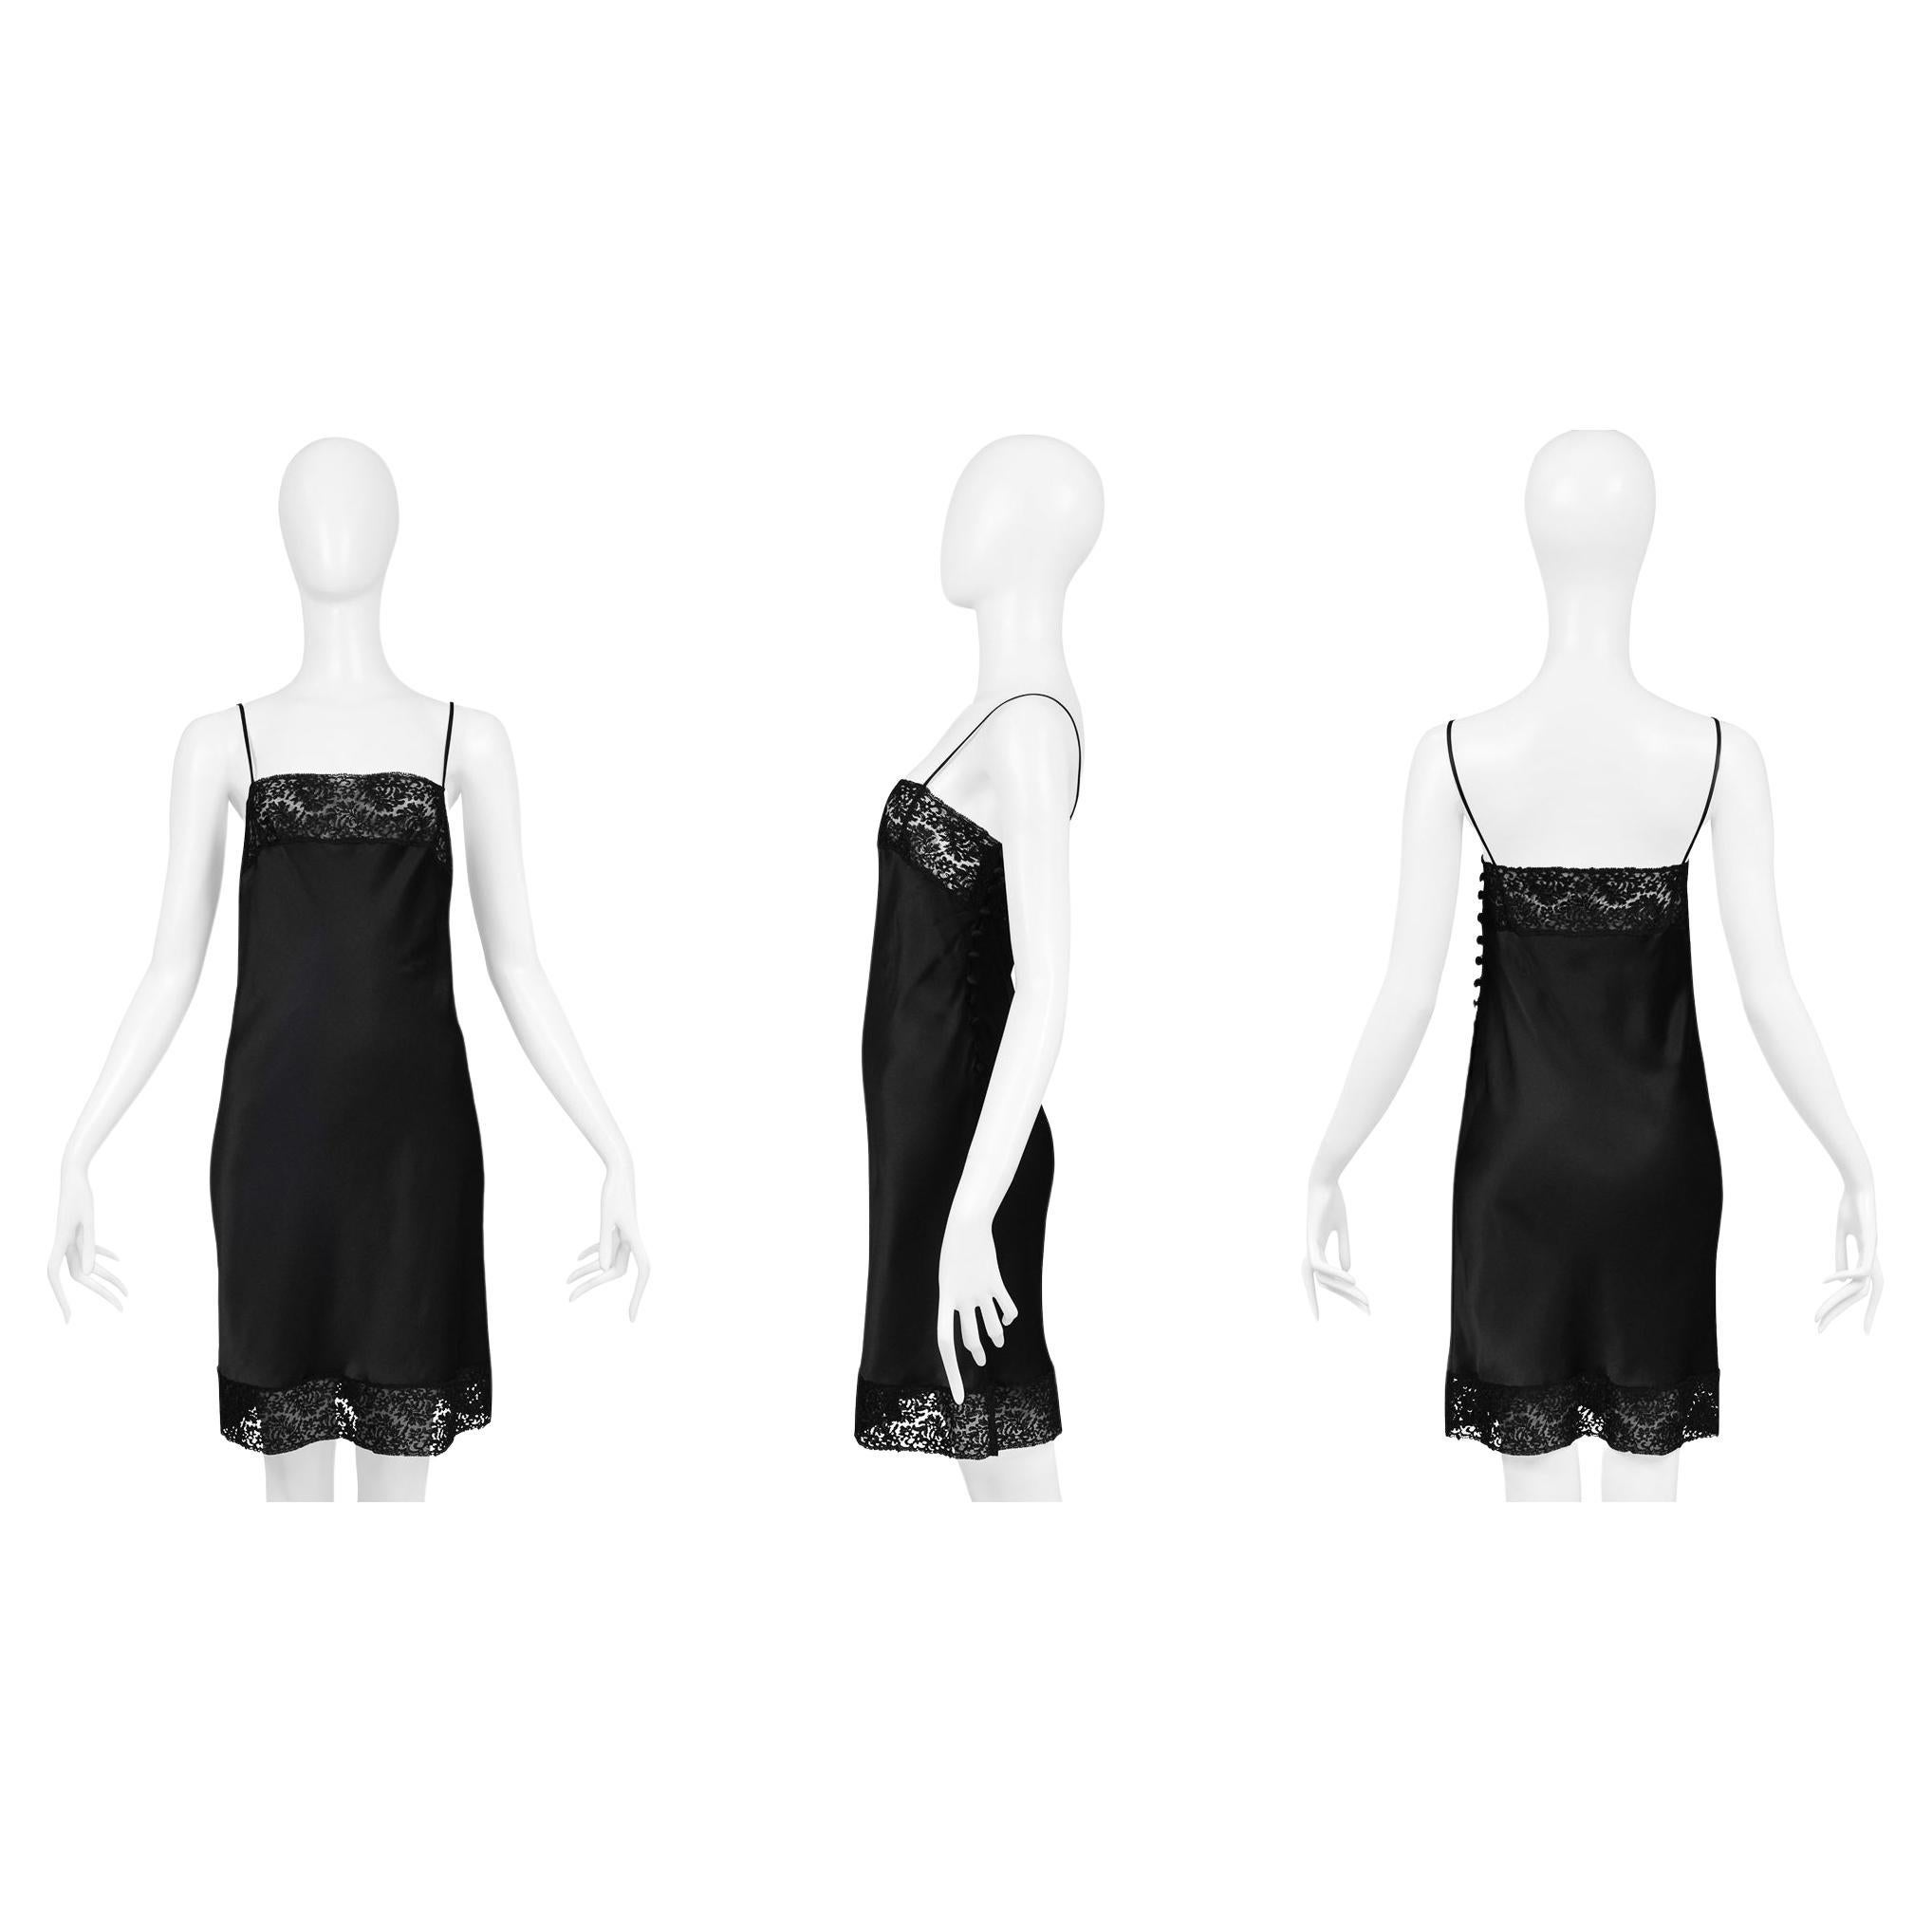 Christian Dior By John Galliano Black Silk And Lace Slip Dress 1997 For Sale